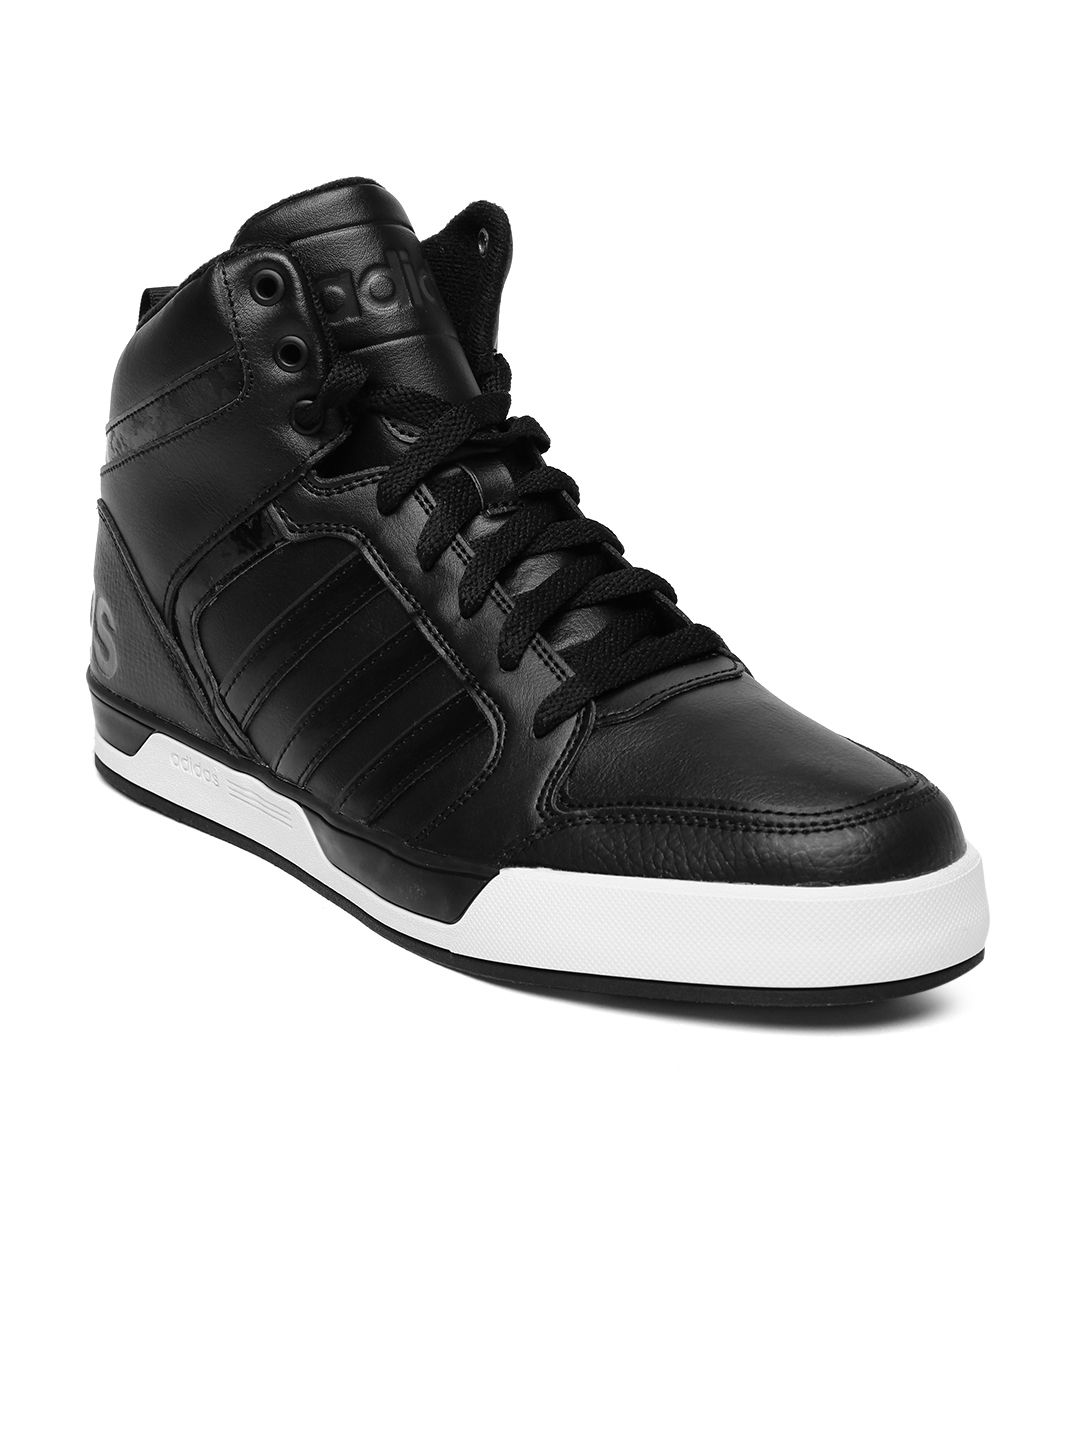 Buy ADIDAS NEO Men Black High Top Sneakers - Casual Shoes for Men ...